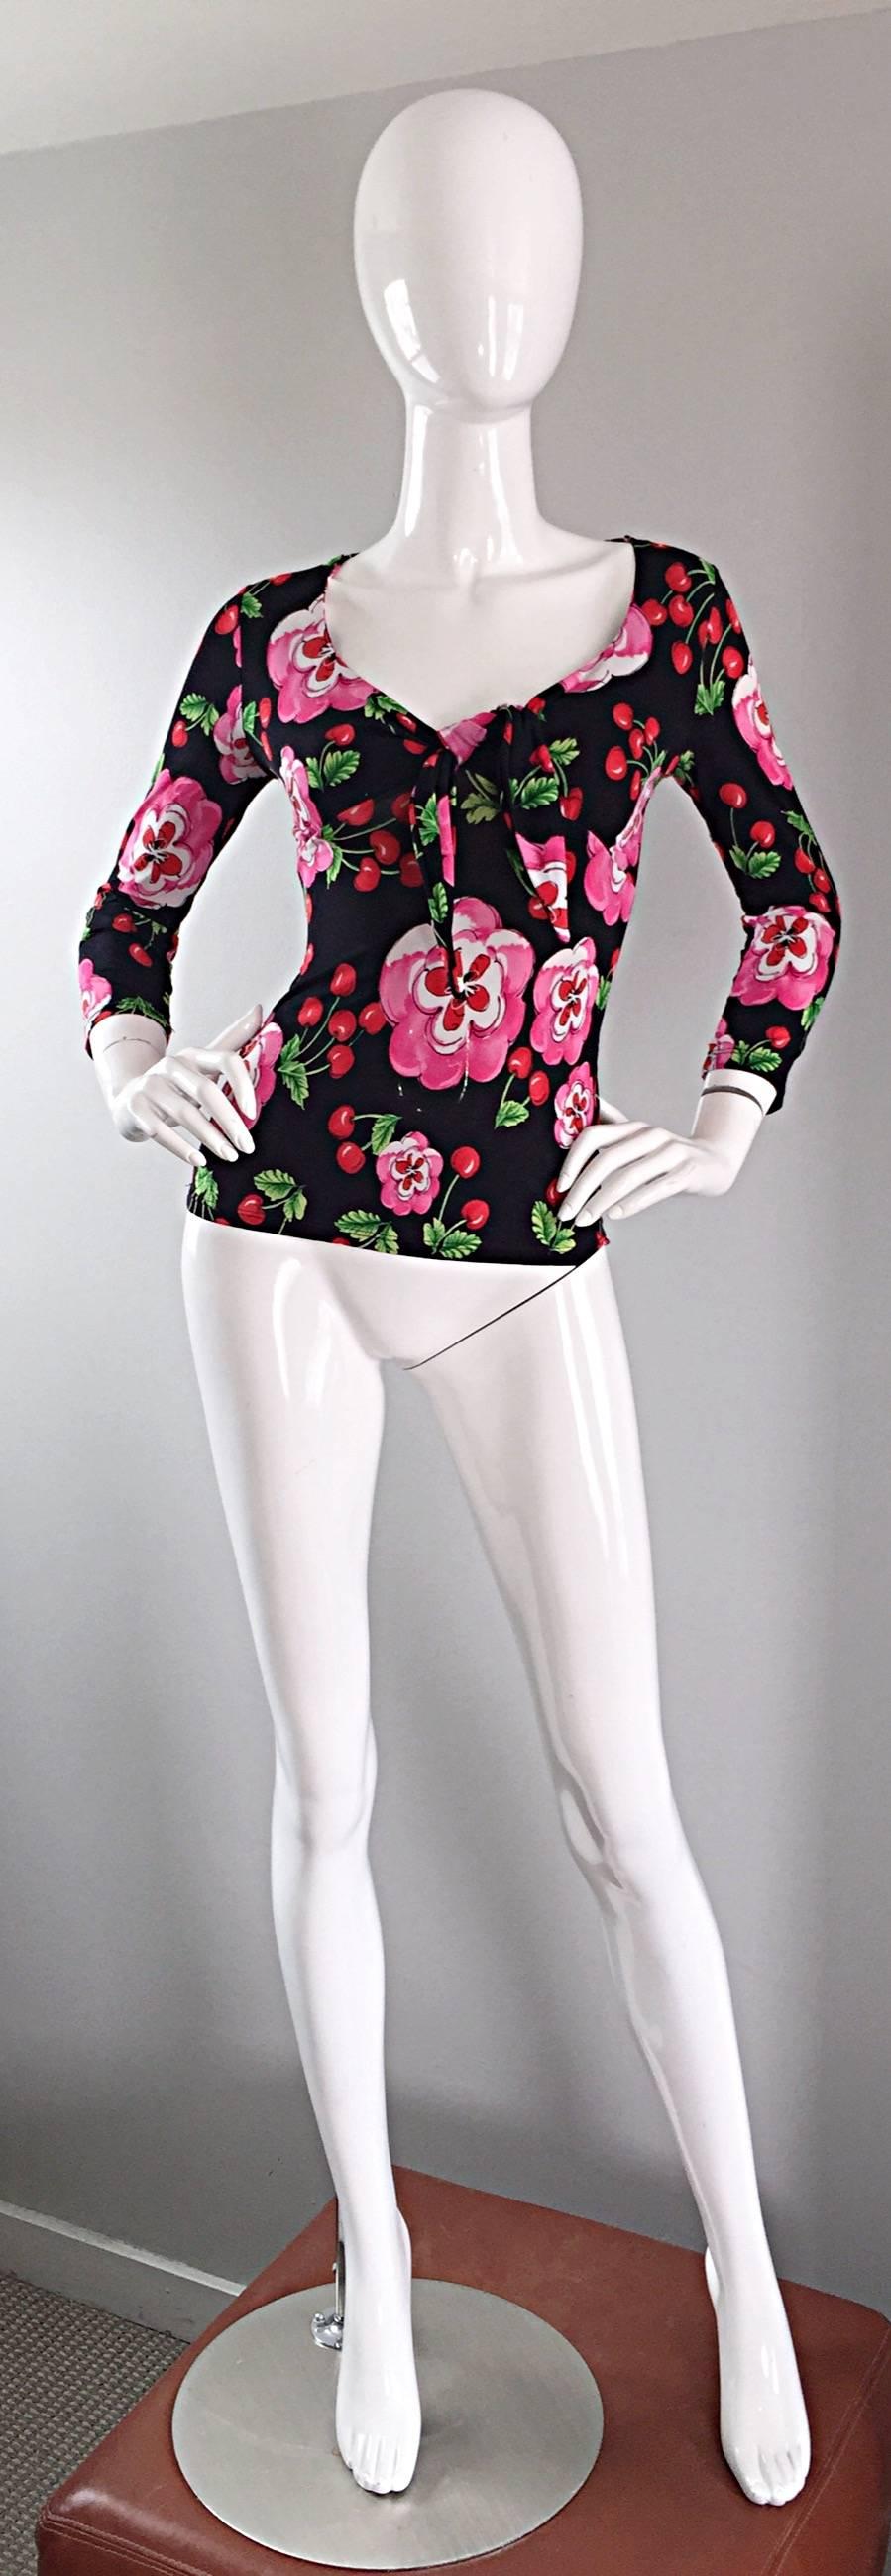 Incredible 90s JUS d'ORANGE (Made in France) cherry print bodycon designer jersey blouse! Features fun prints of red cherries with pink and white flowers throughout. Flattering tie above the bust. Hugs the body in all the right places. Comfortable,